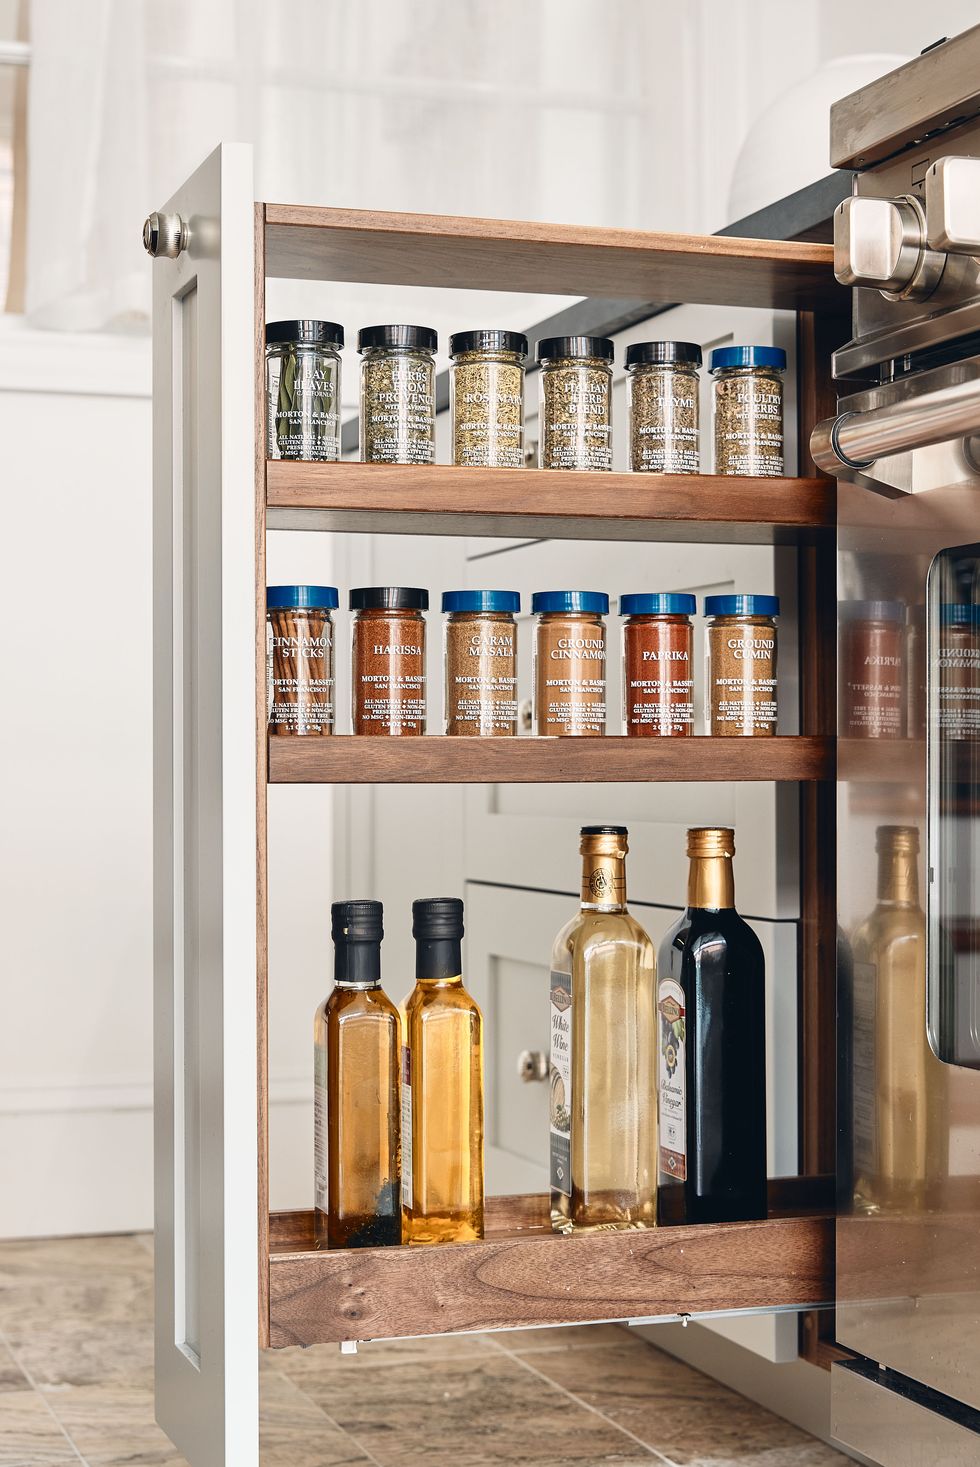 10 Innovative Spice Rack Ideas and Storage Solutions